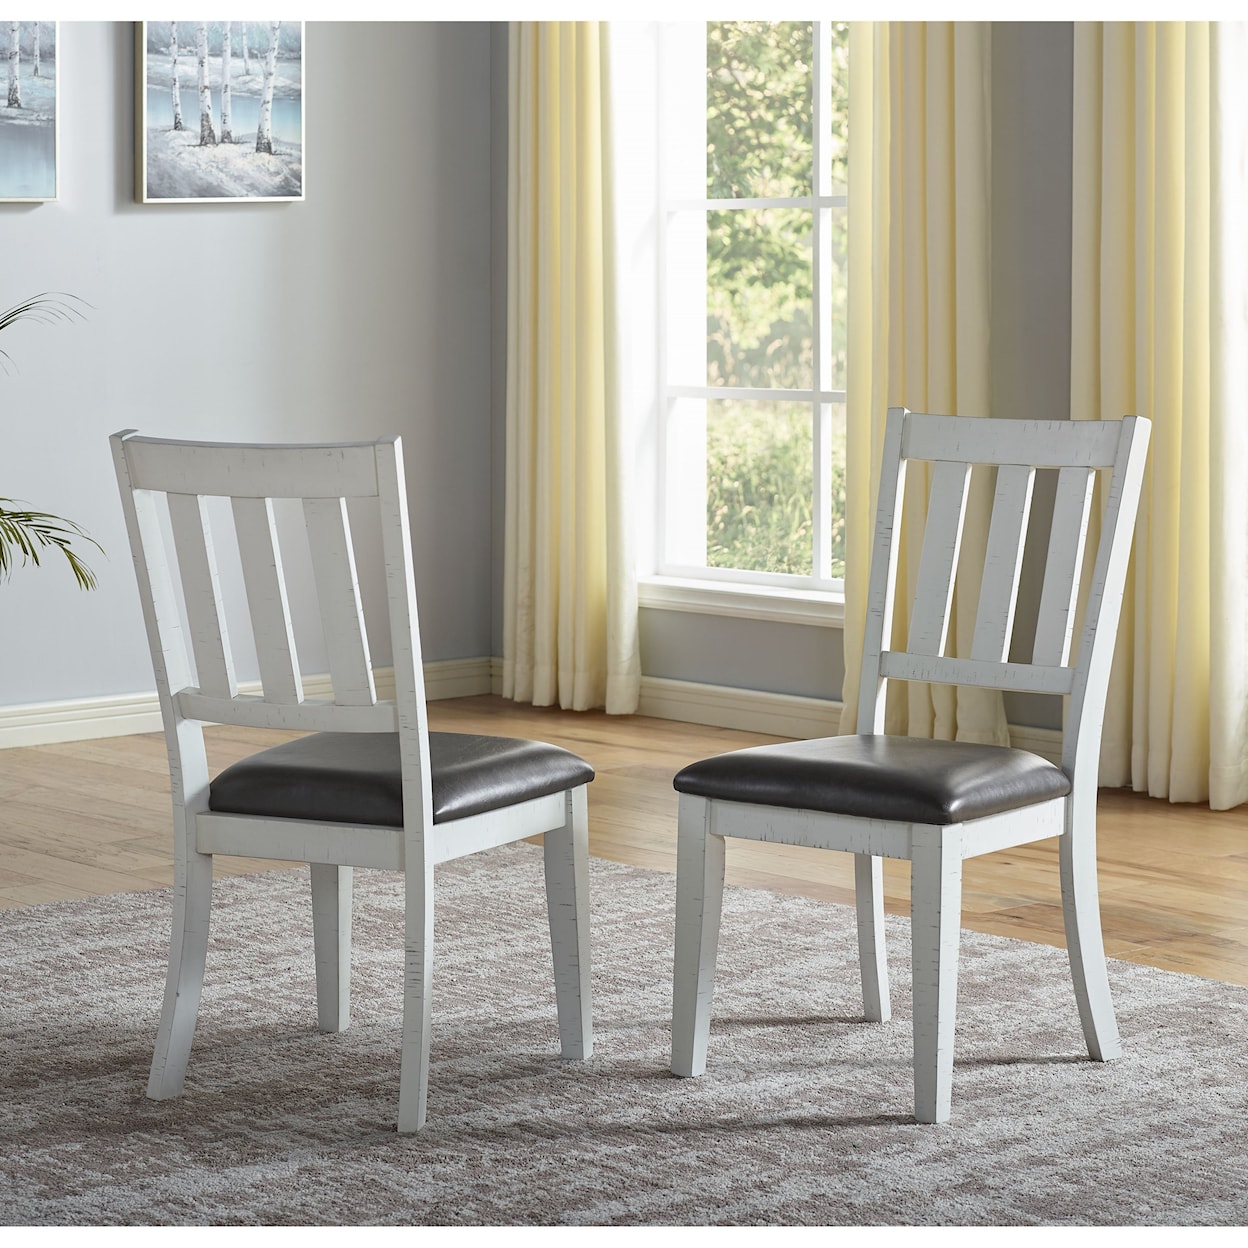 Steve Silver Robin 6-Piece Table and Chair Set with Bench